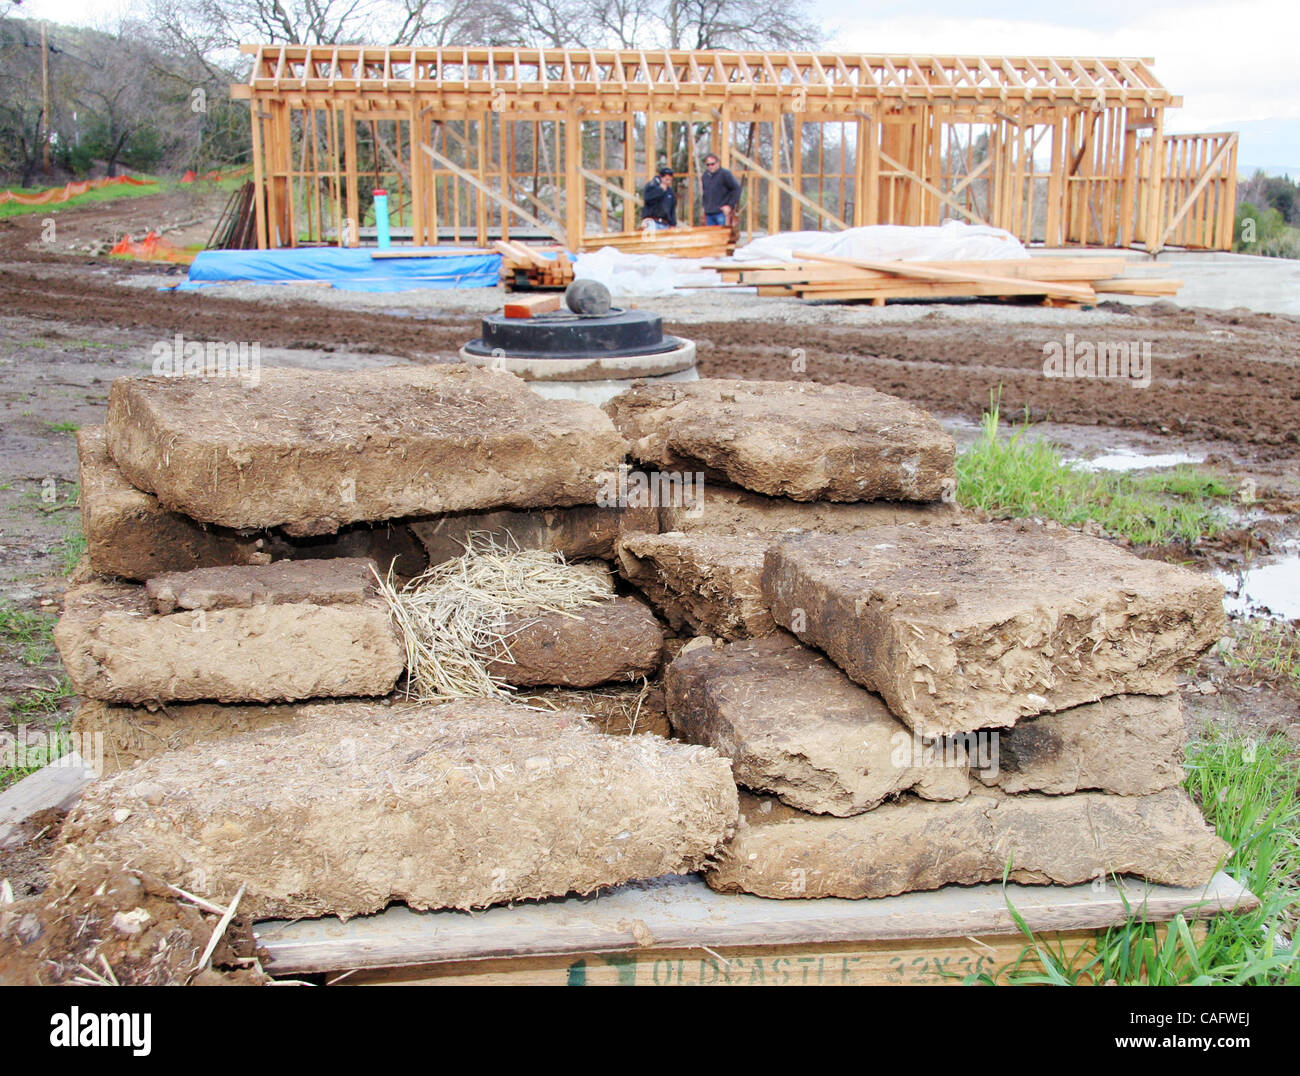 Adobe blocks melt down as a reproduction of an old bunk house goes up at the Alviso Adobe Community Park in Pleasanton, Calif. Wednesday, February 20, 2008. (Jay Solmonson/Tri-Valley Herald) Stock Photo